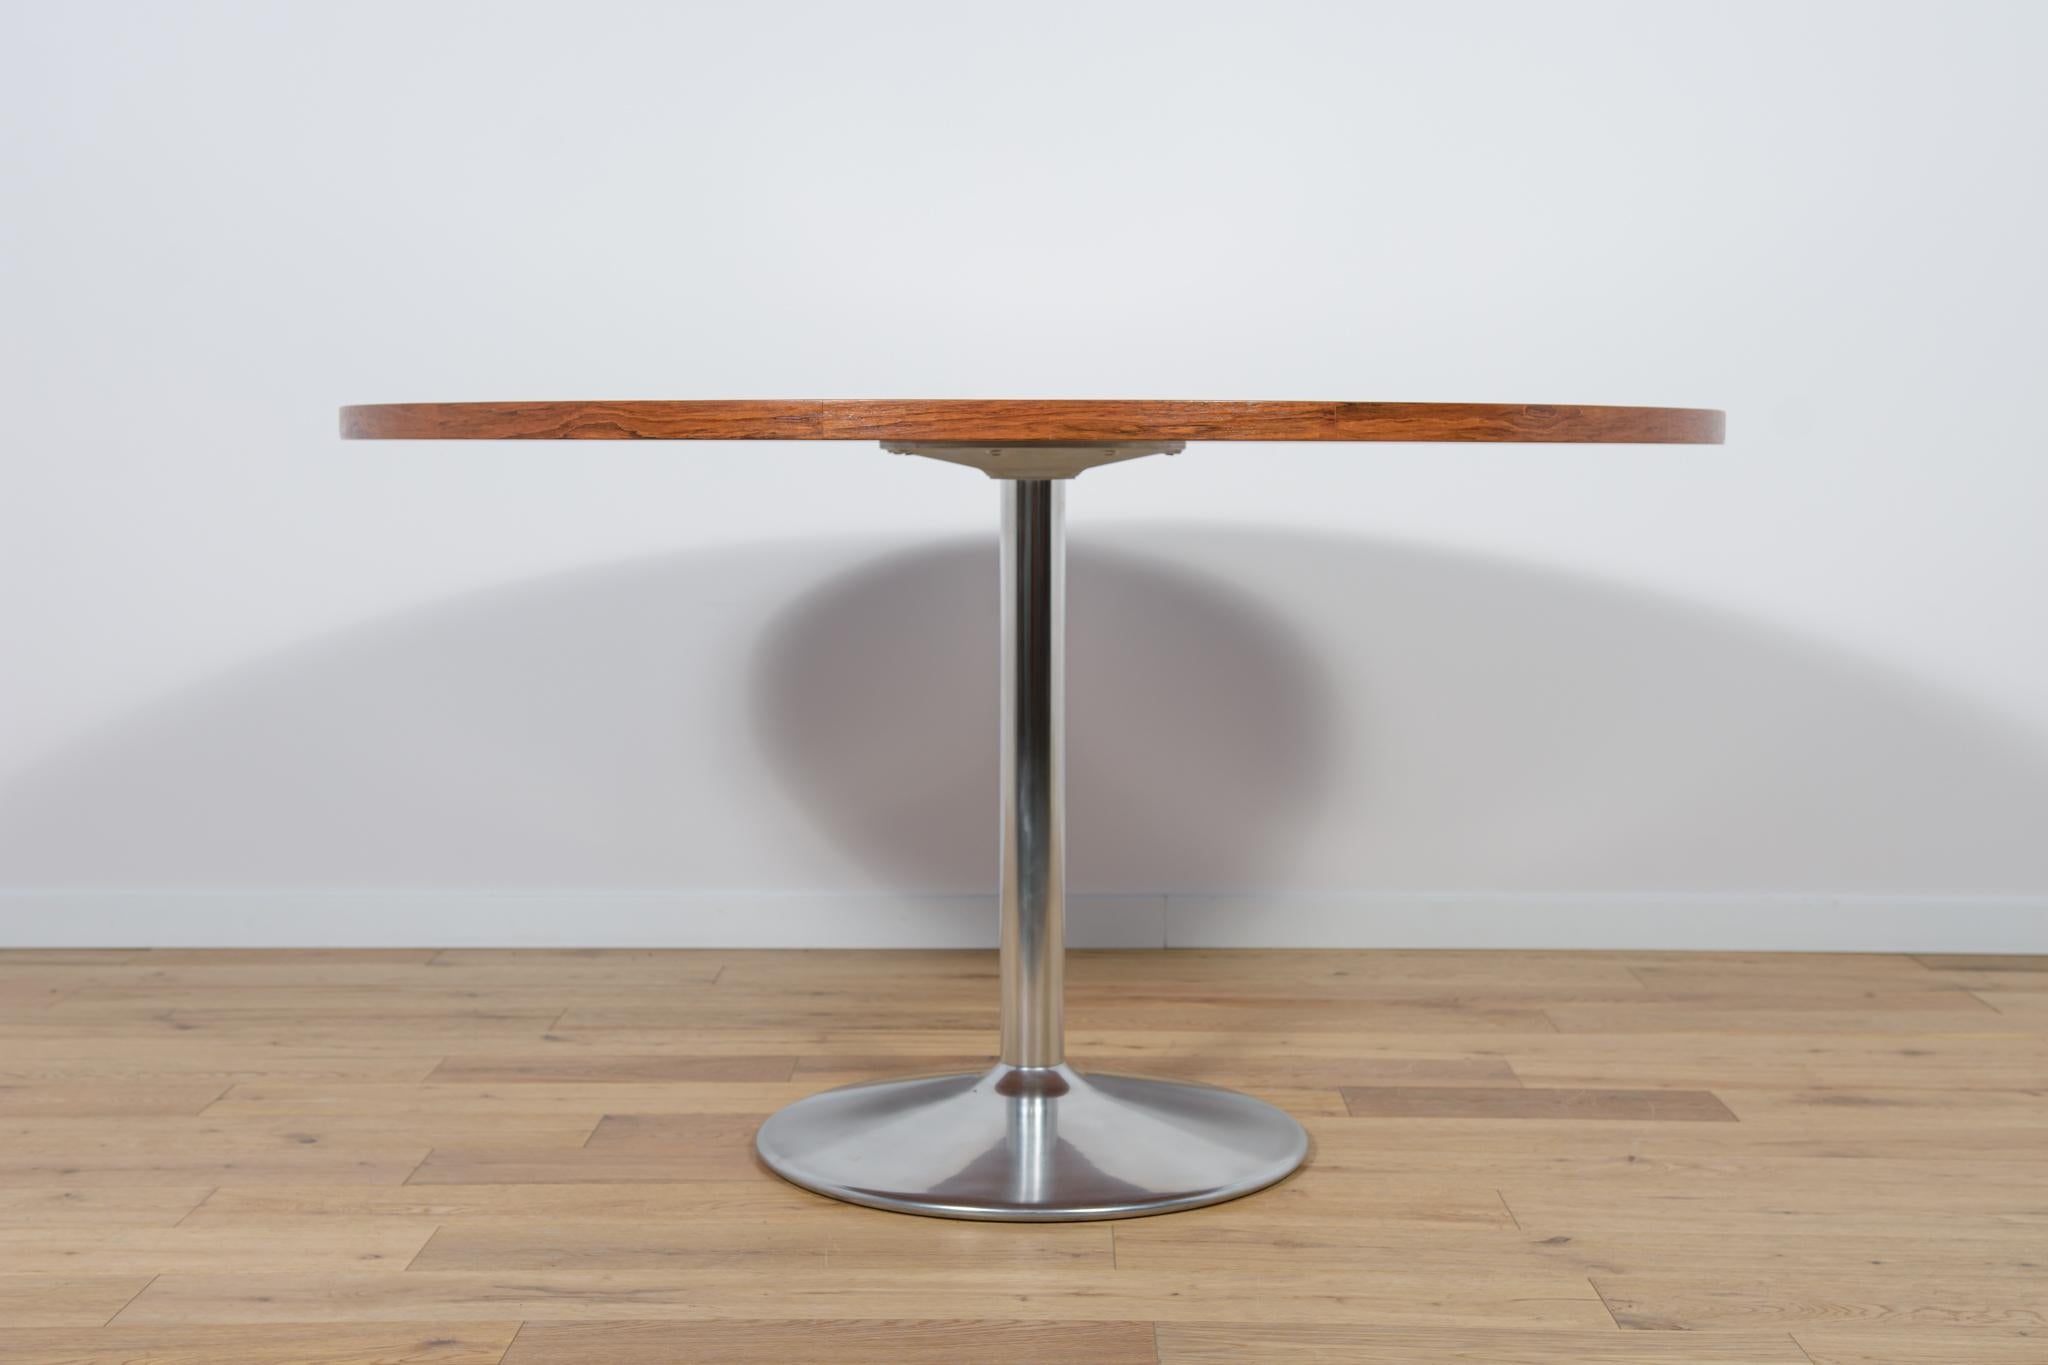 The table was produced in Denmark in the 1970s. Table top made of jatobe veneer. The furniture is after a comprehensive carpentry renovation, cleaned of the old coating, finished with high-quality Danish Oil. The table base is made of aluminum has